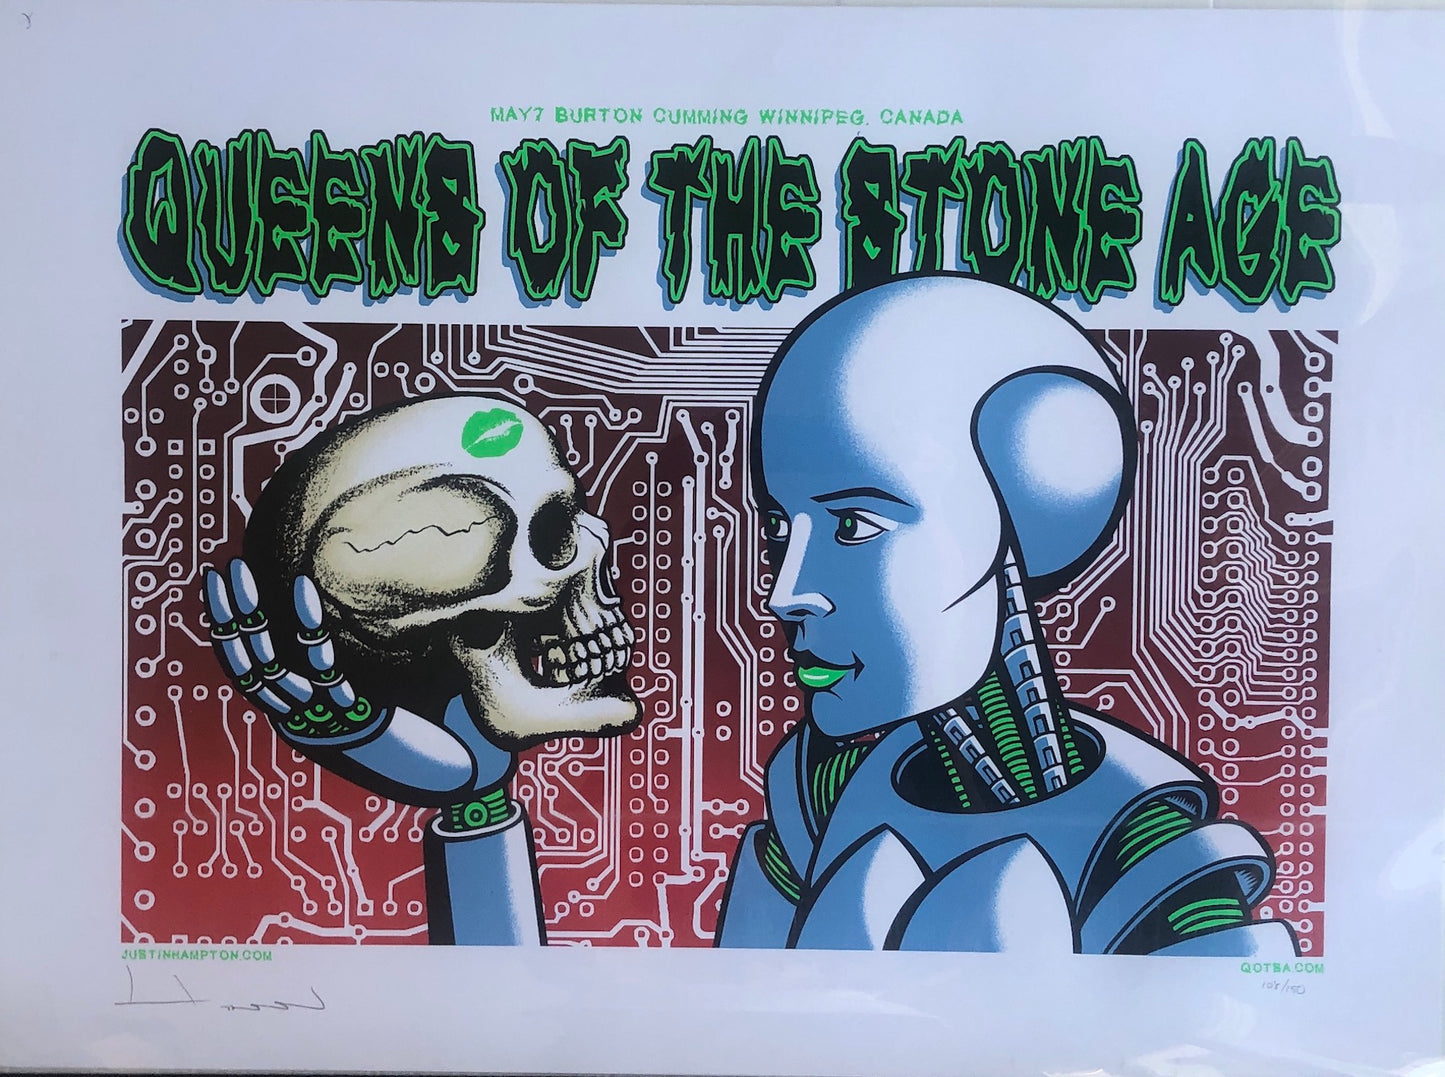 QUEENS OF THE STONE AGE, WINNIPEG, CANADA